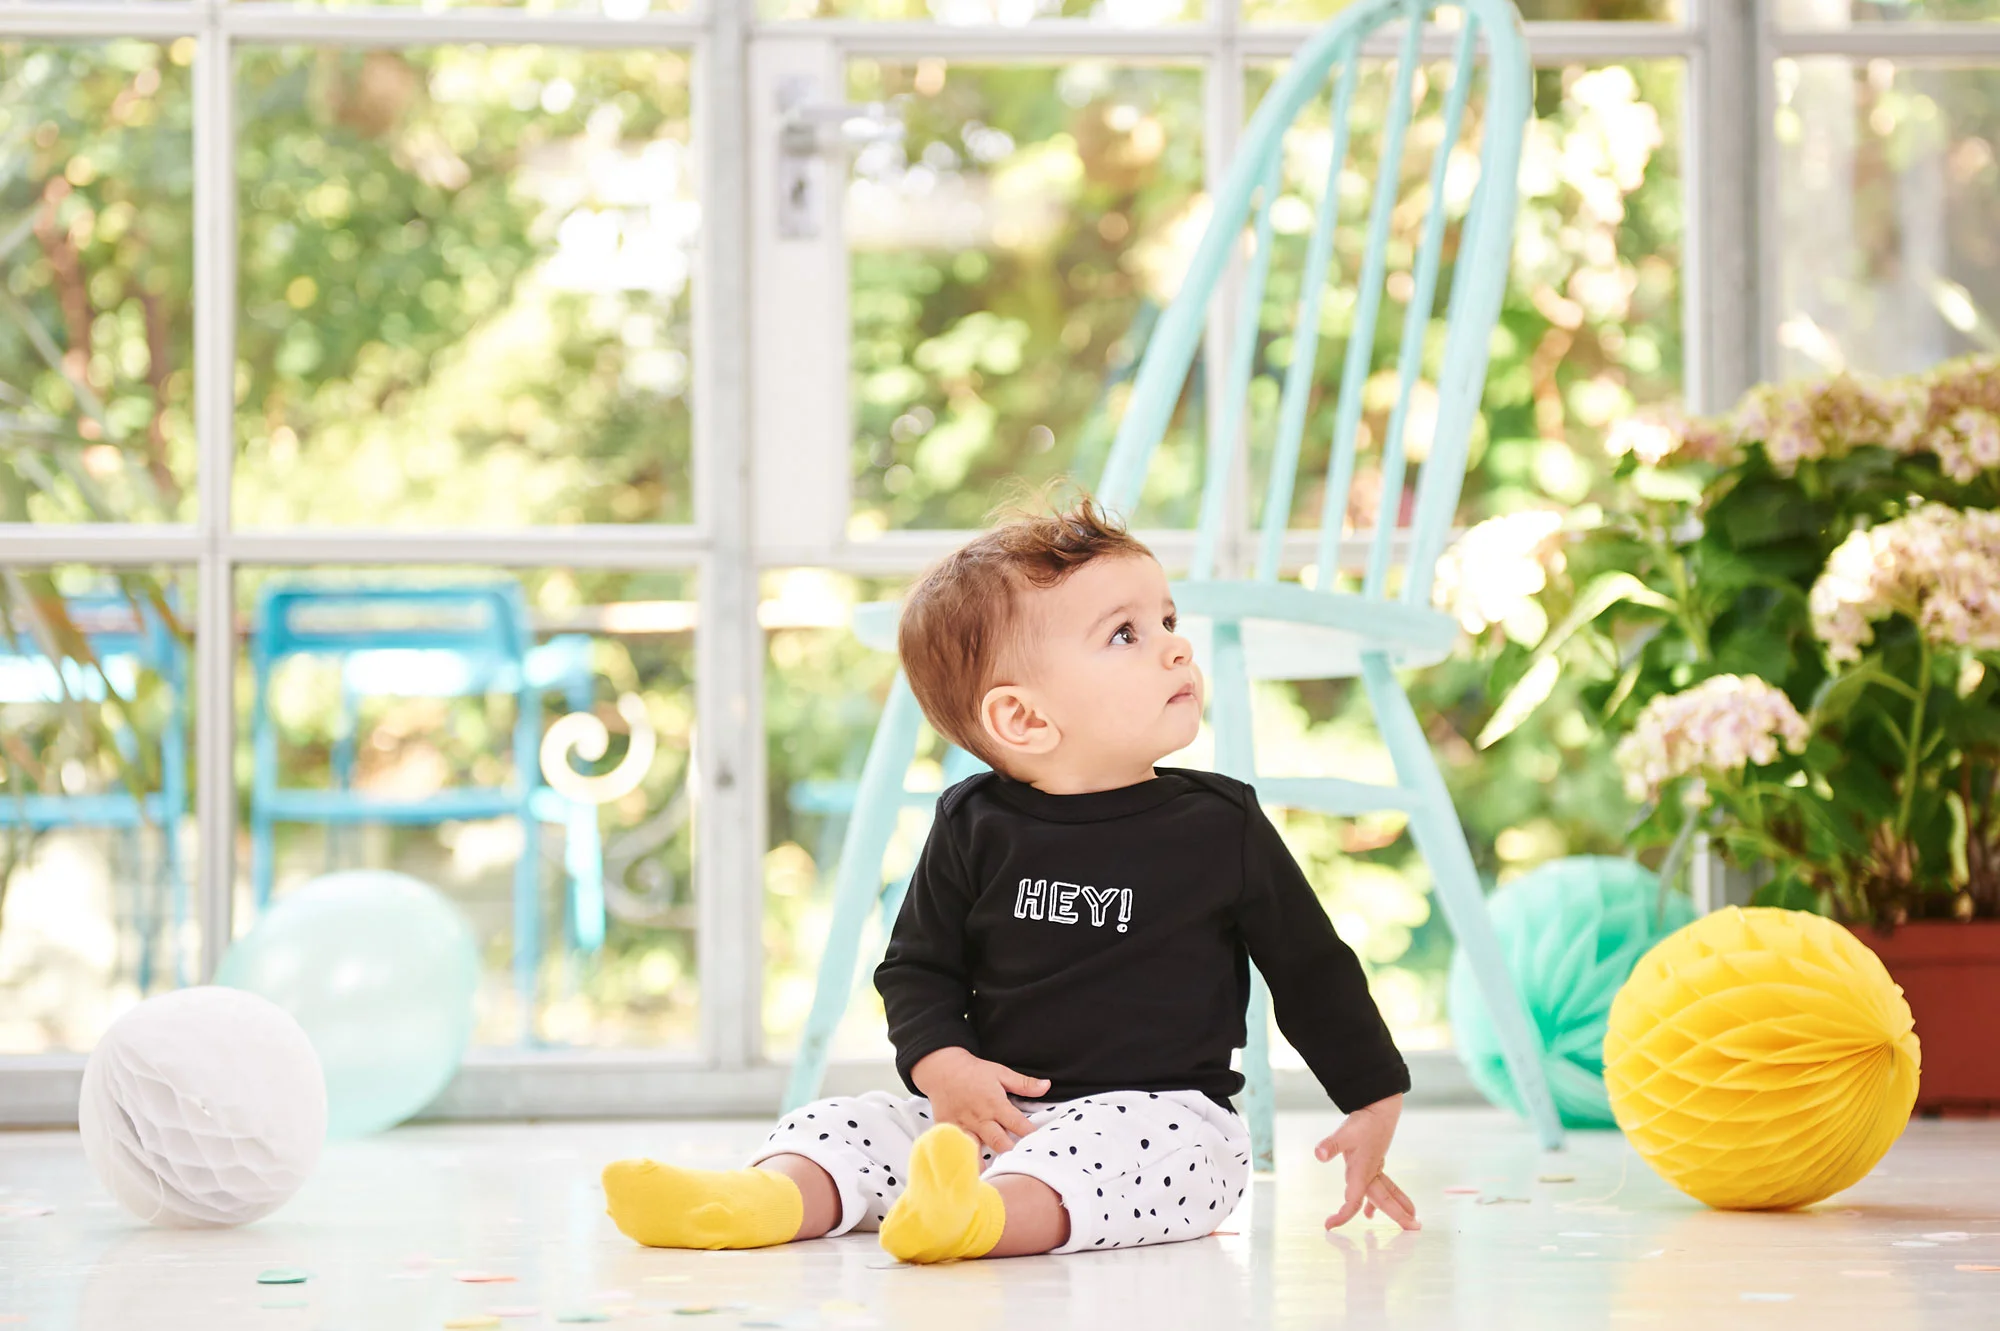 a baby in a Hey printed t-shirt and patterned trousers designed